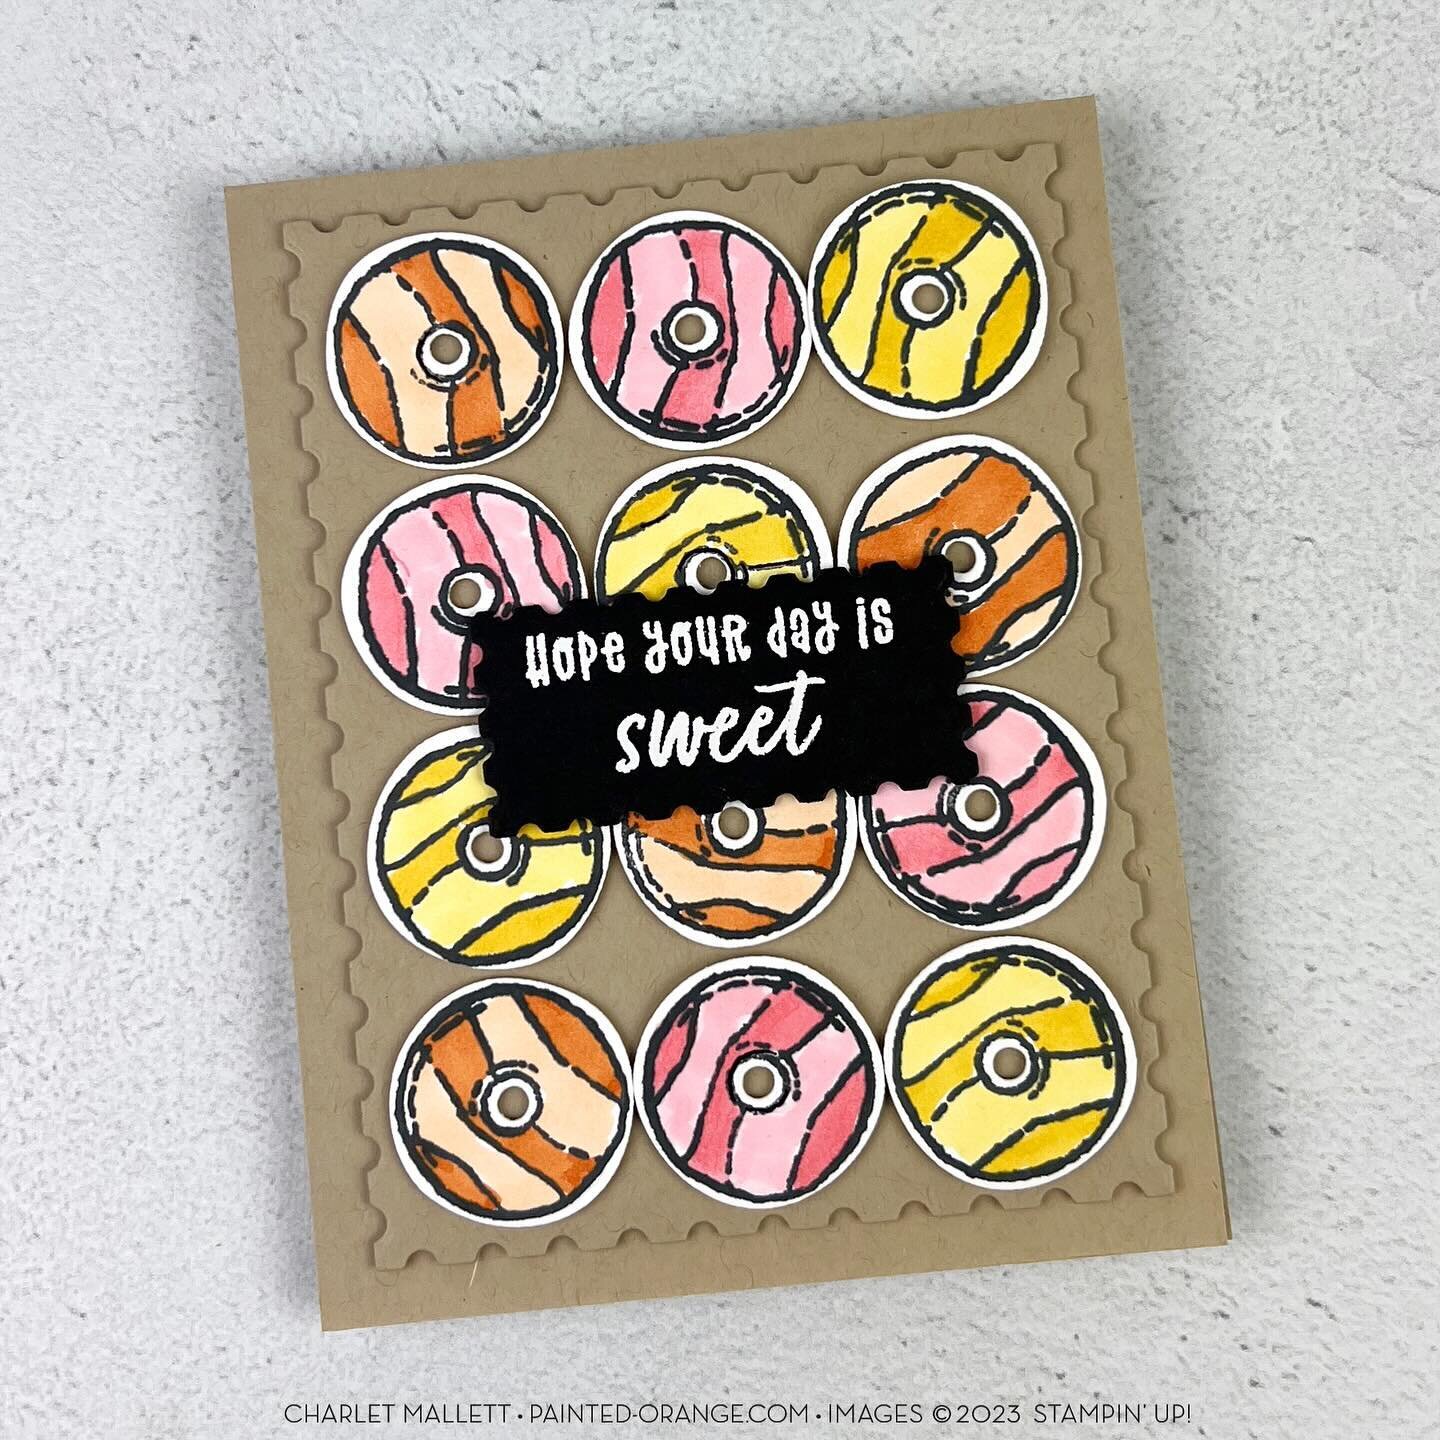 Color challenges are my favorite! This card created for #gdp433- still time to play along with us @global_design_project 🩷🧡💛 check out our feed for more inspiration. 

See how I stamped this project in my reels. All products #stampinup 

#cardmaki